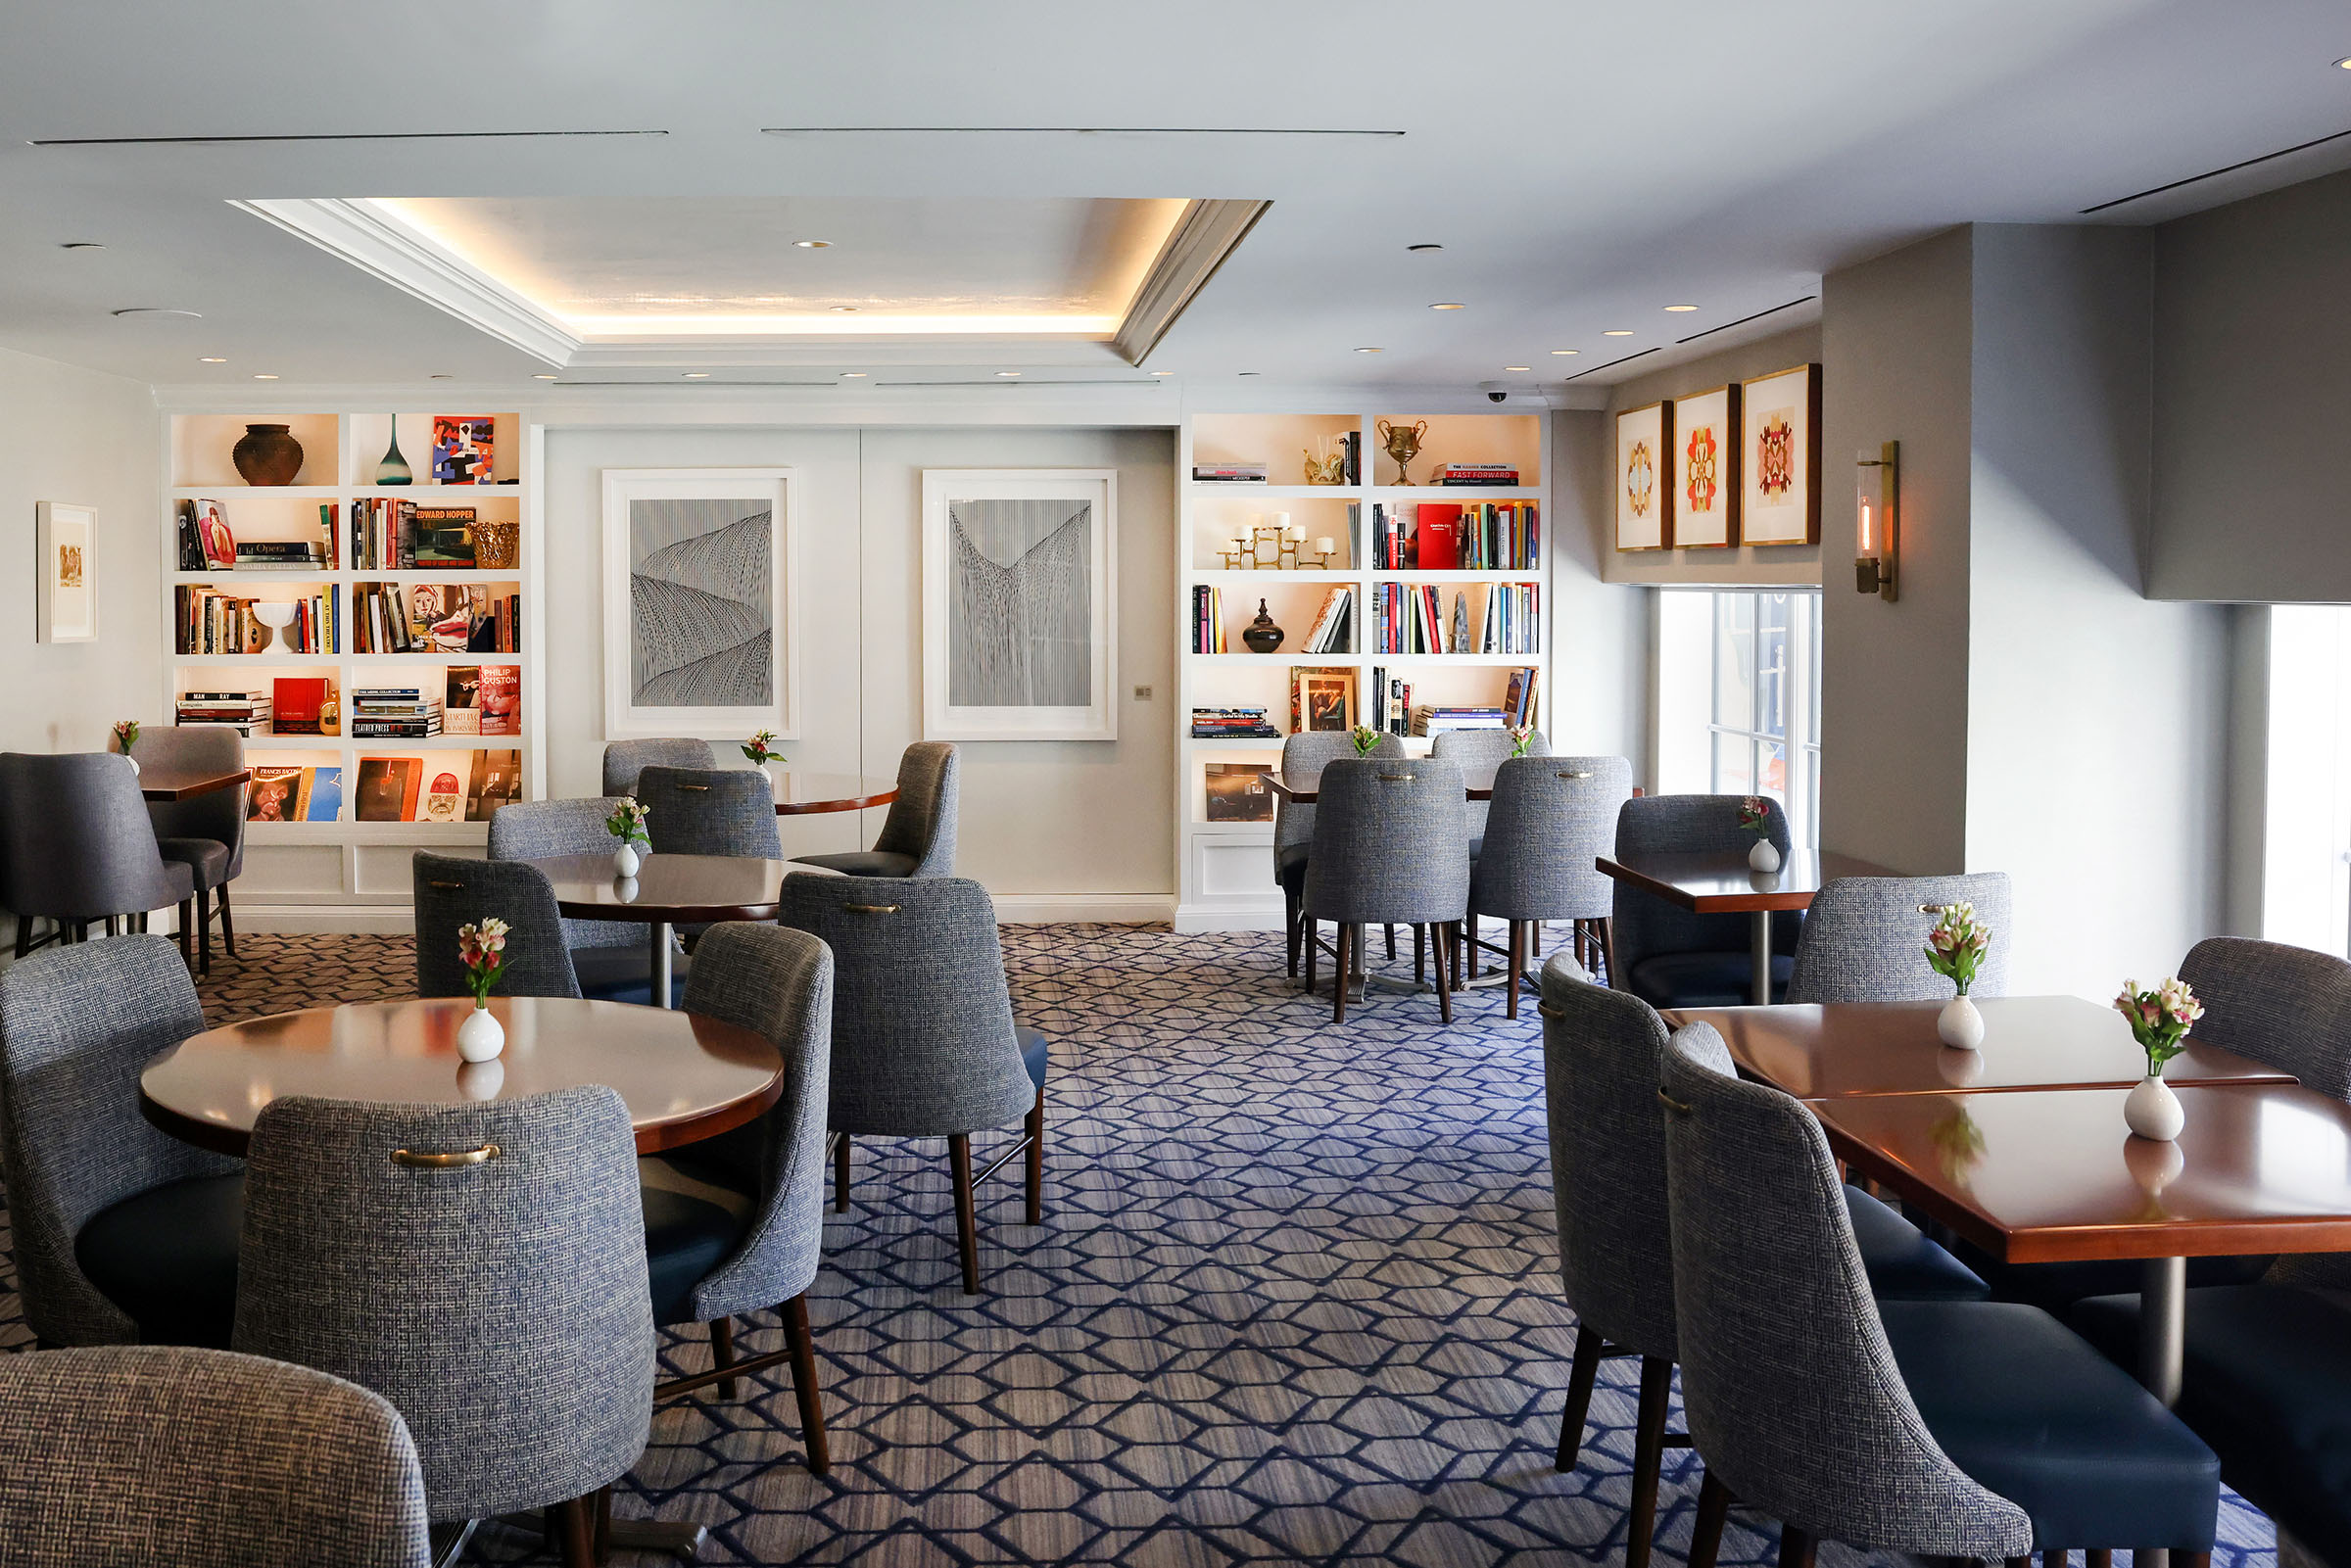 Colorful artwork and artifacts line white bookshelves in the hotel's dining area